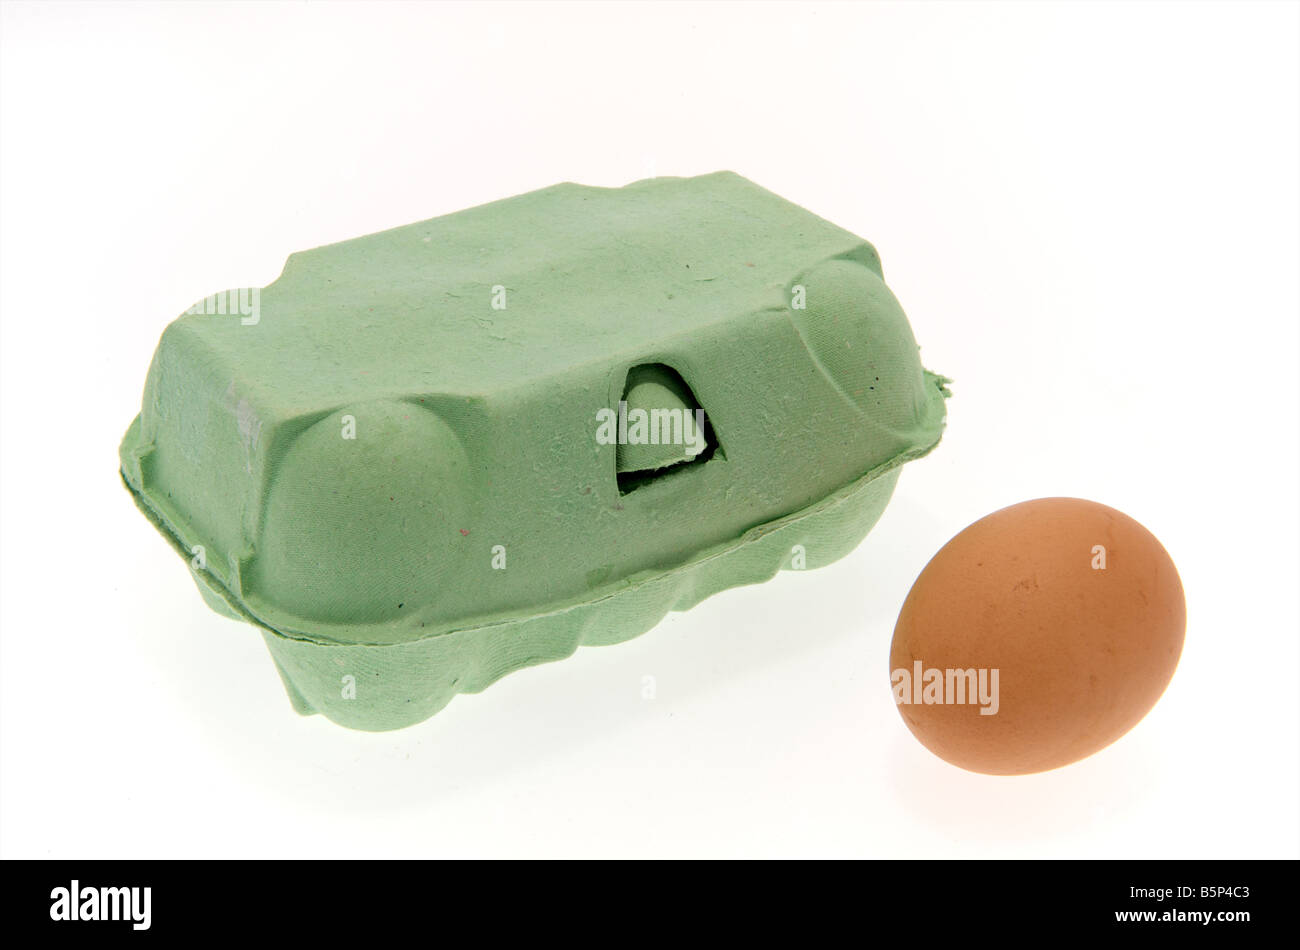 Duck egg cartons Cut Out Stock Images & Pictures - Alamy